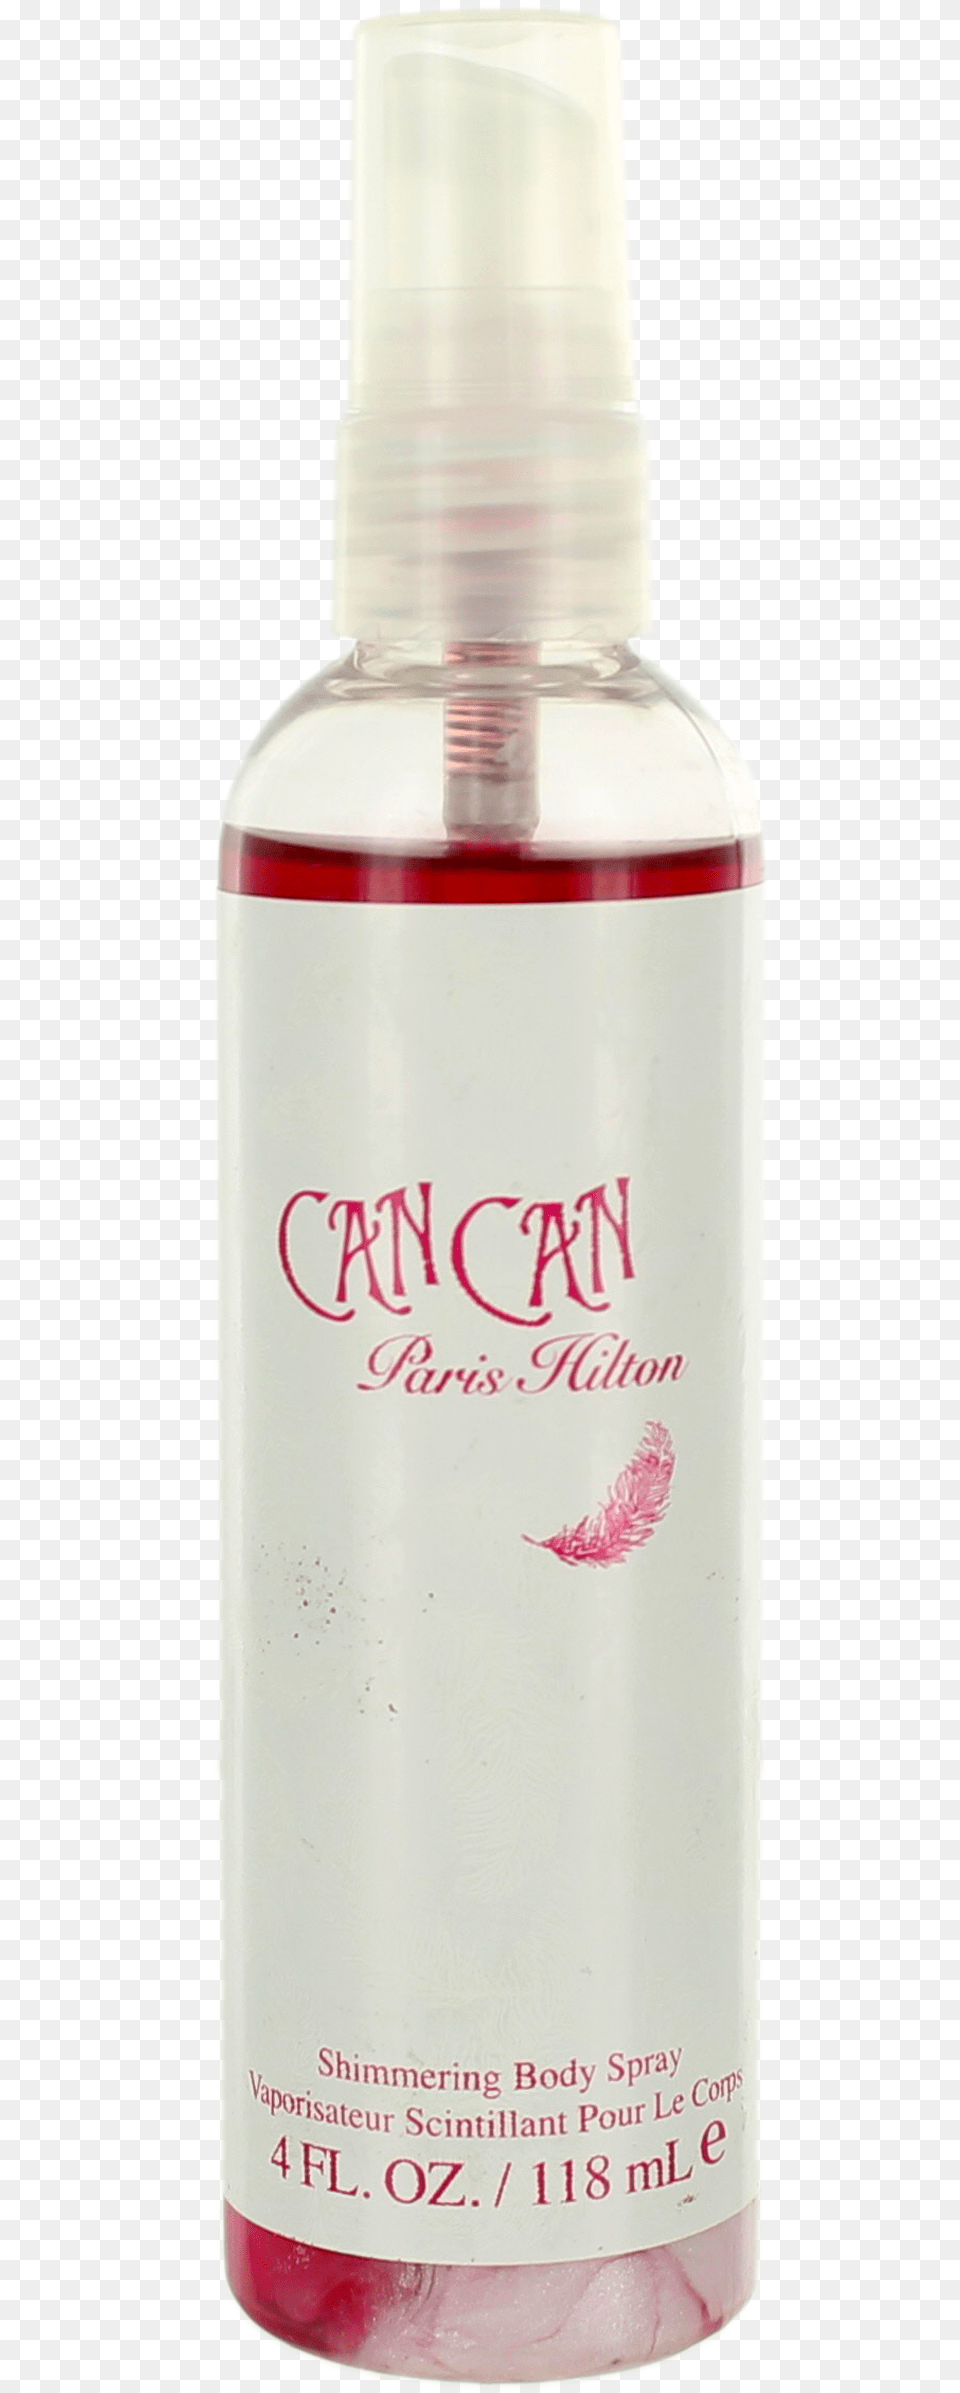 Can Can By Paris Hilton For Women Body Mist Spray 4oz Bottle, Cosmetics, Perfume, Deodorant Png